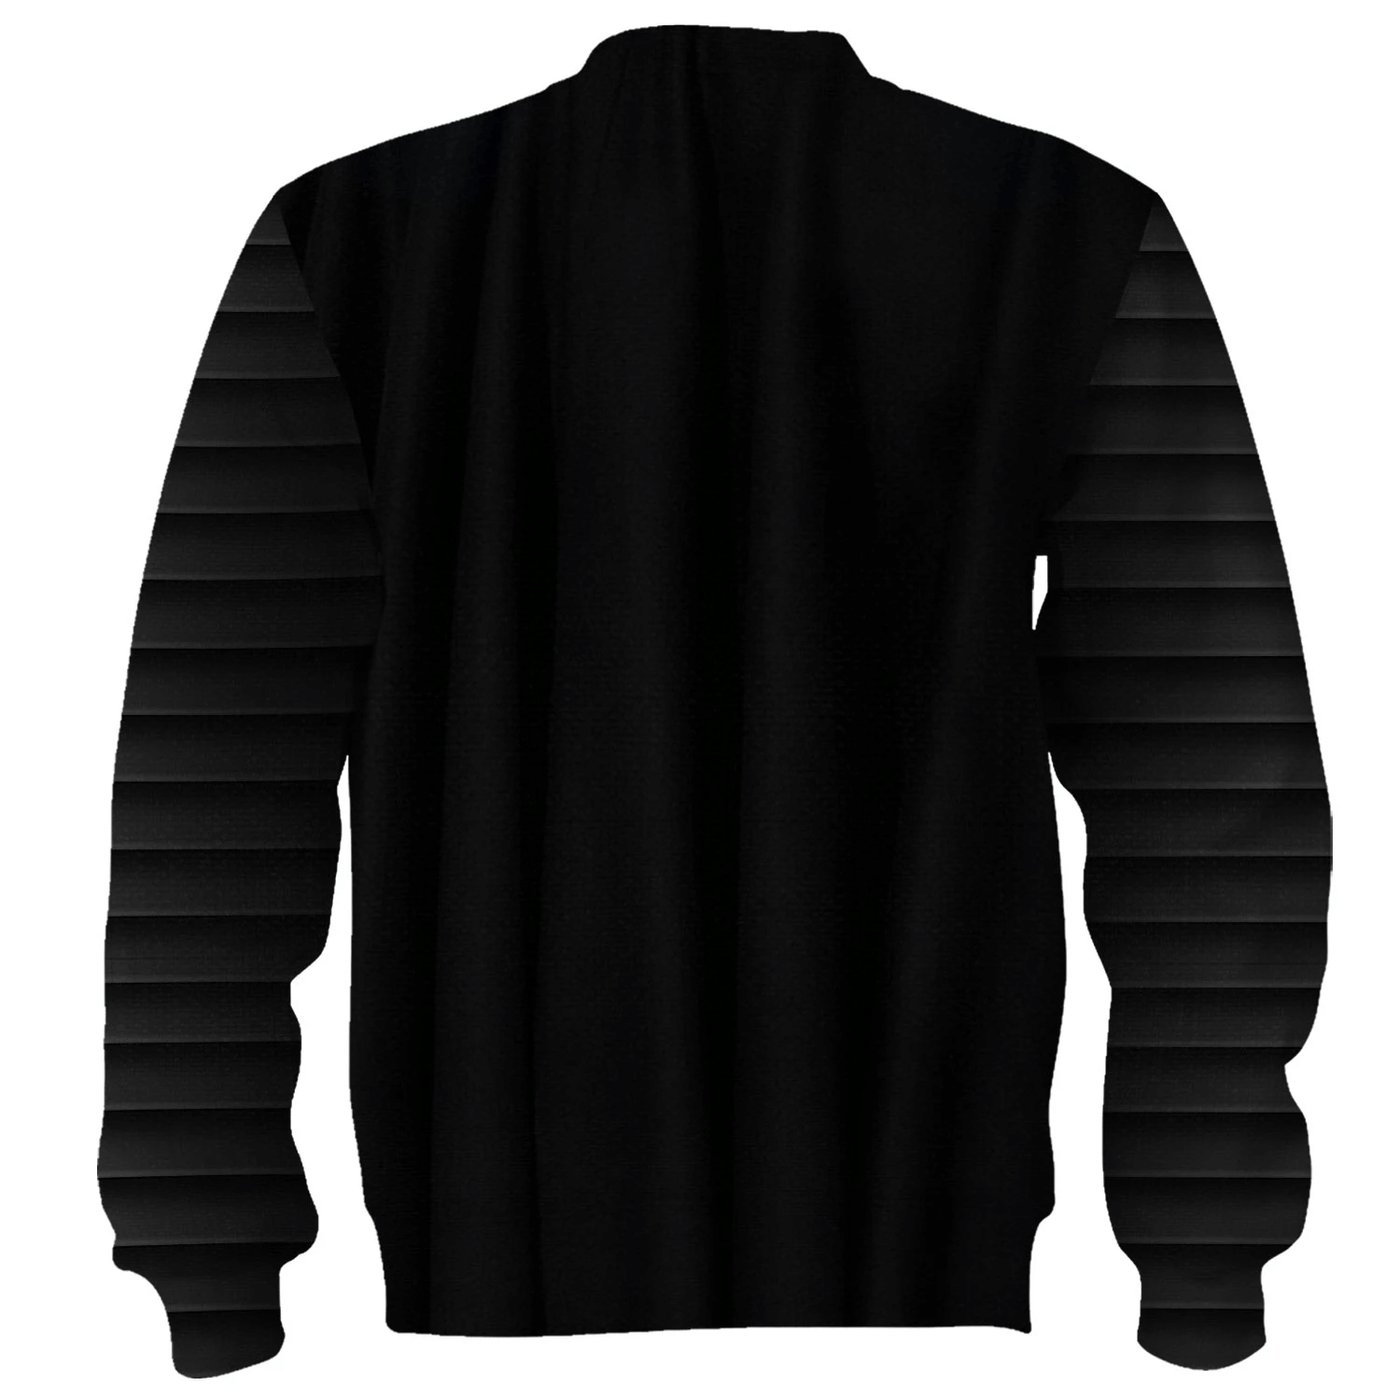 Star Wars Kylo Ren Costume - Sweater - Ugly Christmas Sweater